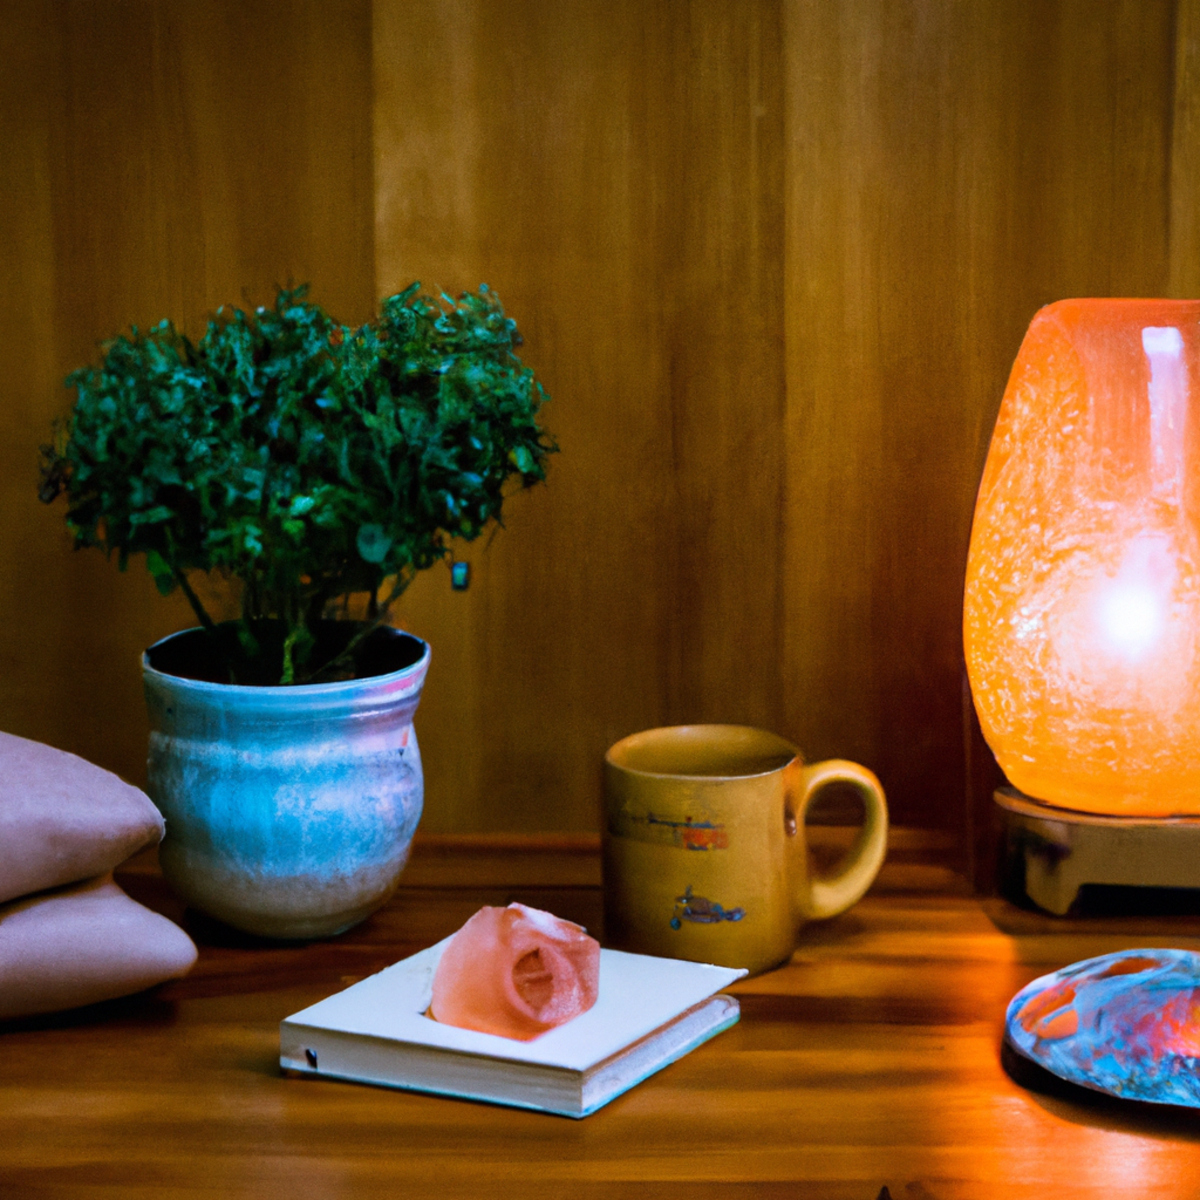 A calming scene of a table with books, tea, crystals, and a plant, illuminated by a Himalayan salt lamp.